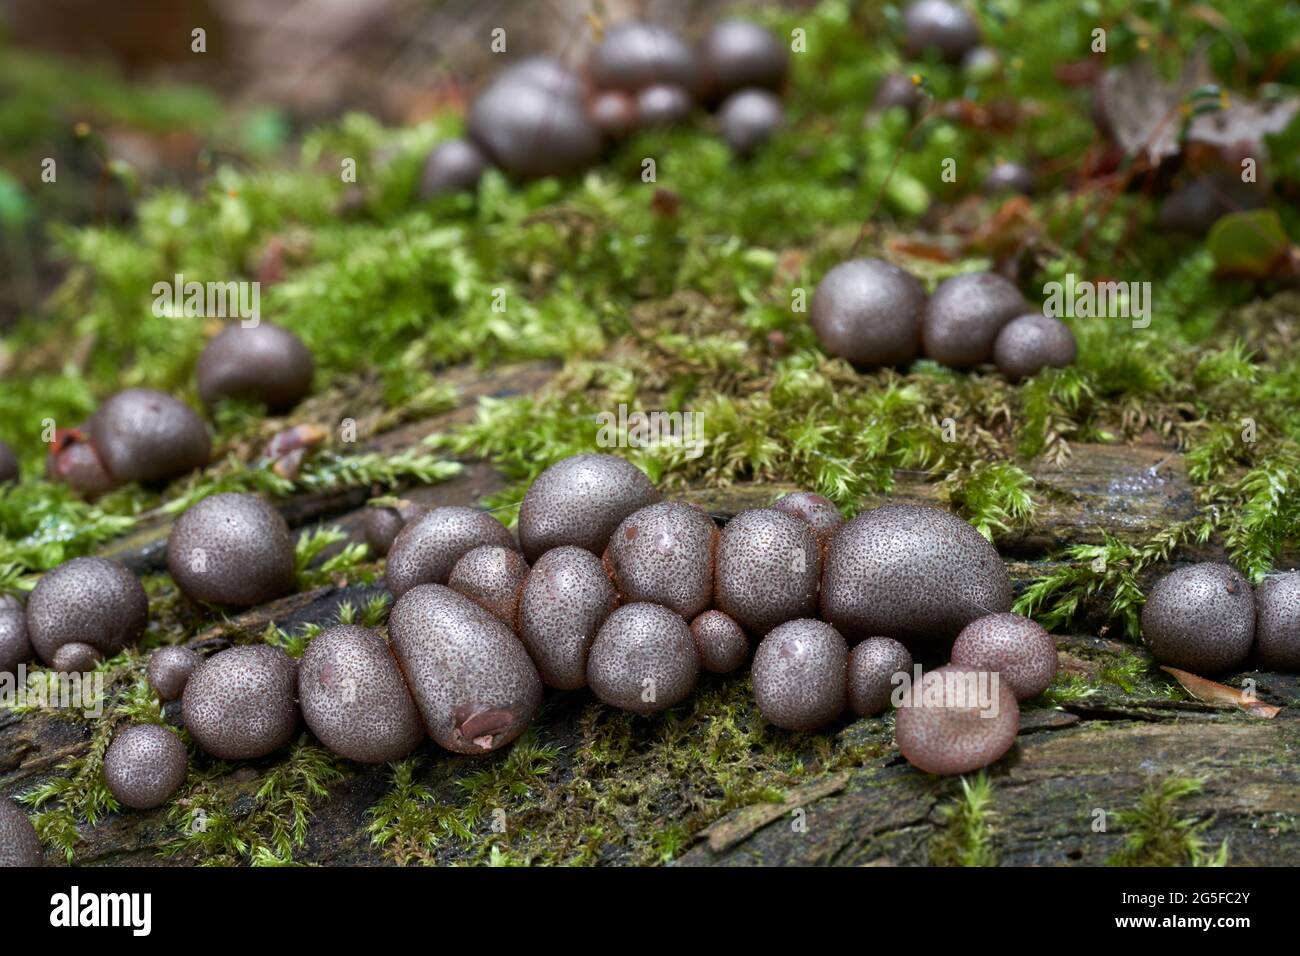 Inedible mushroom Lycogala epidendrum in spruce forest. Known as wolf's milk or groening's slime. Group of wild mushroom growing on wood. Stock Photo